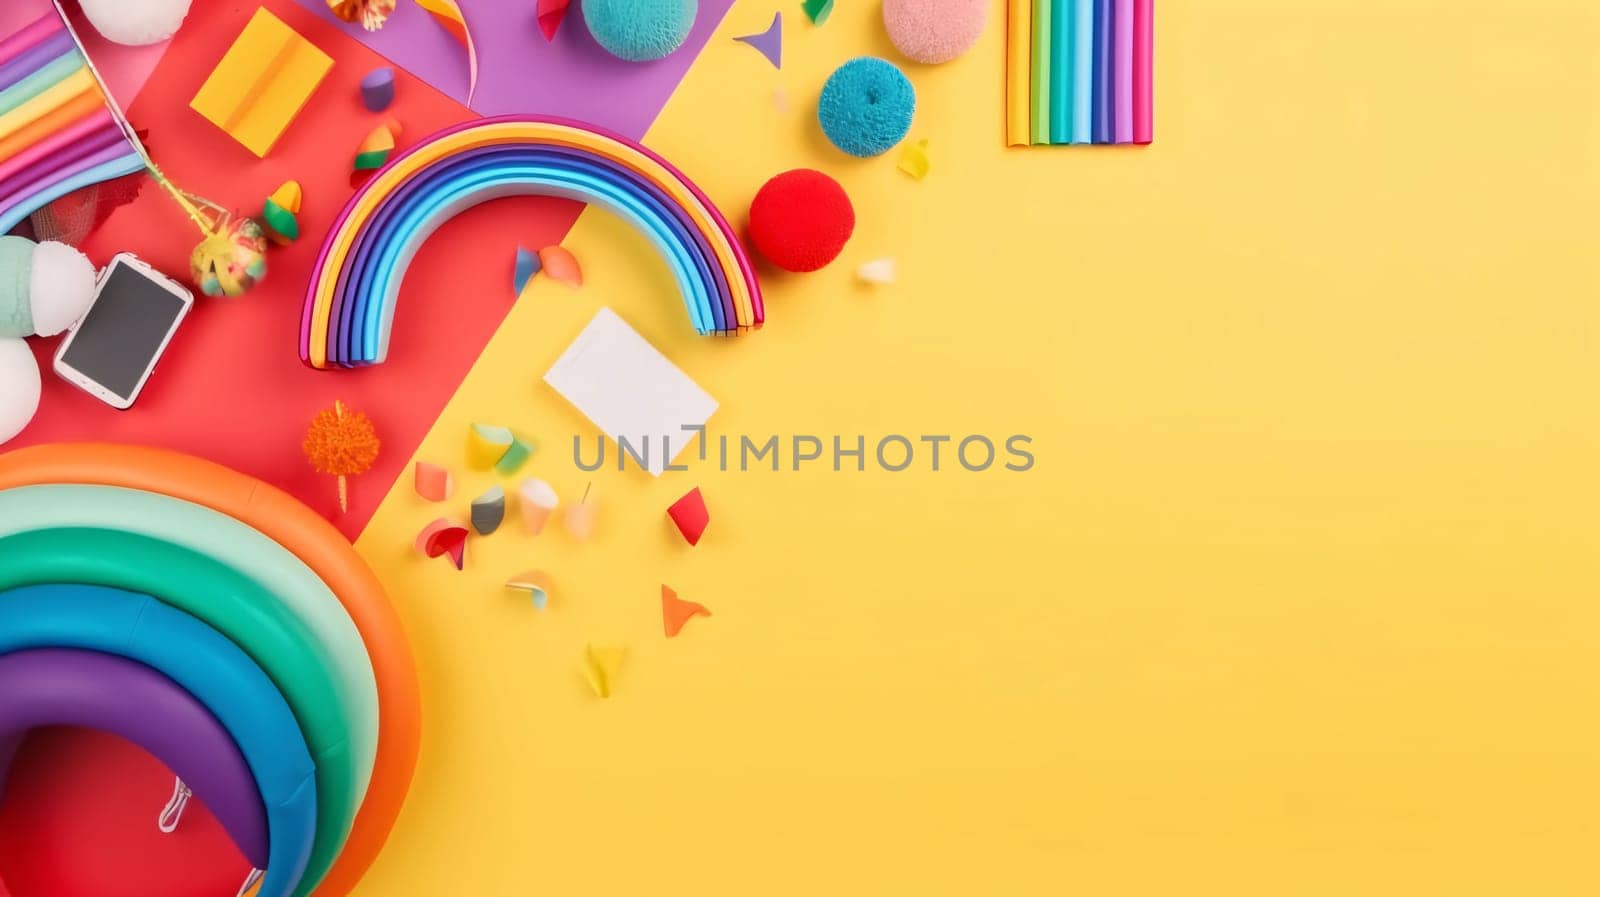 Banner: Top view of colorful rainbow, confetti, stationery and smartphone on yellow background